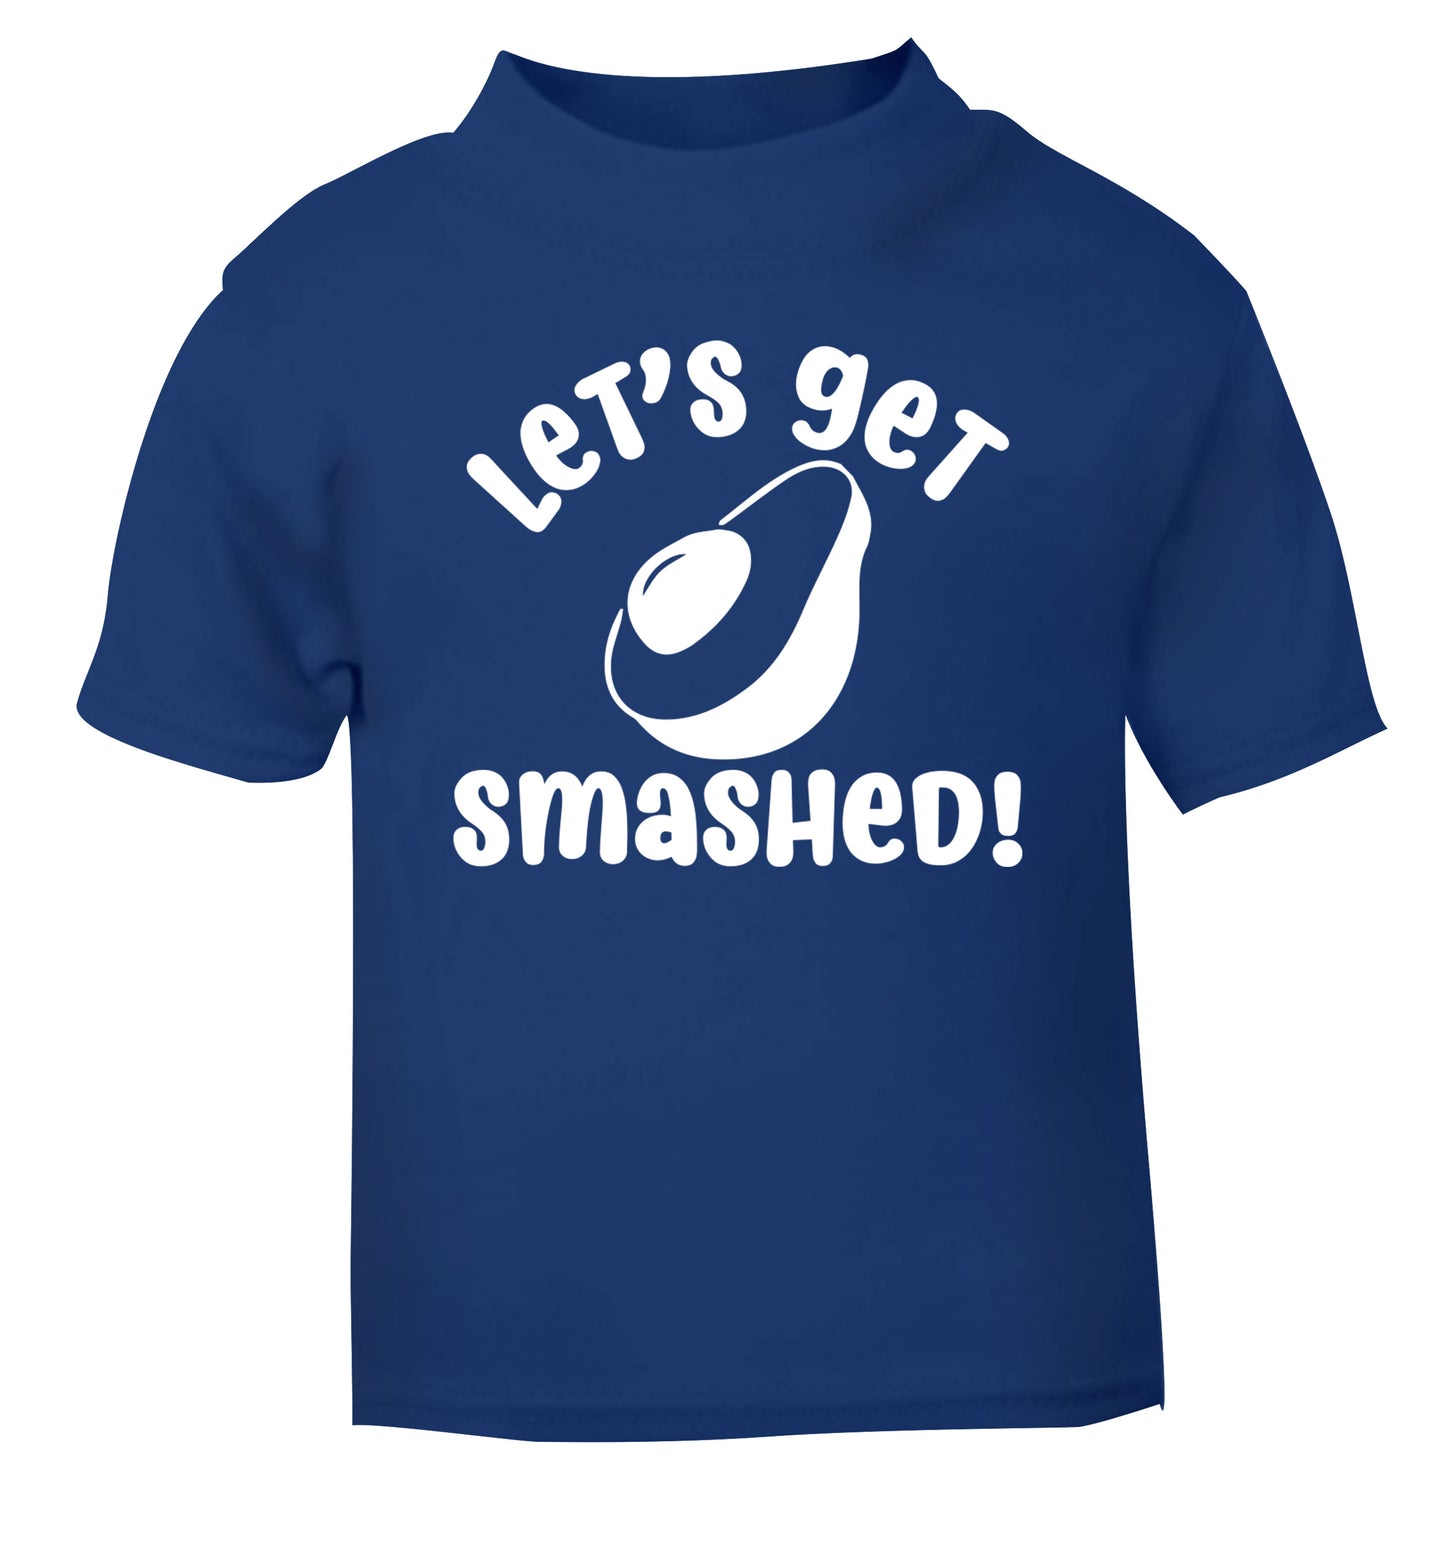 Let's get smashed blue Baby Toddler Tshirt 2 Years